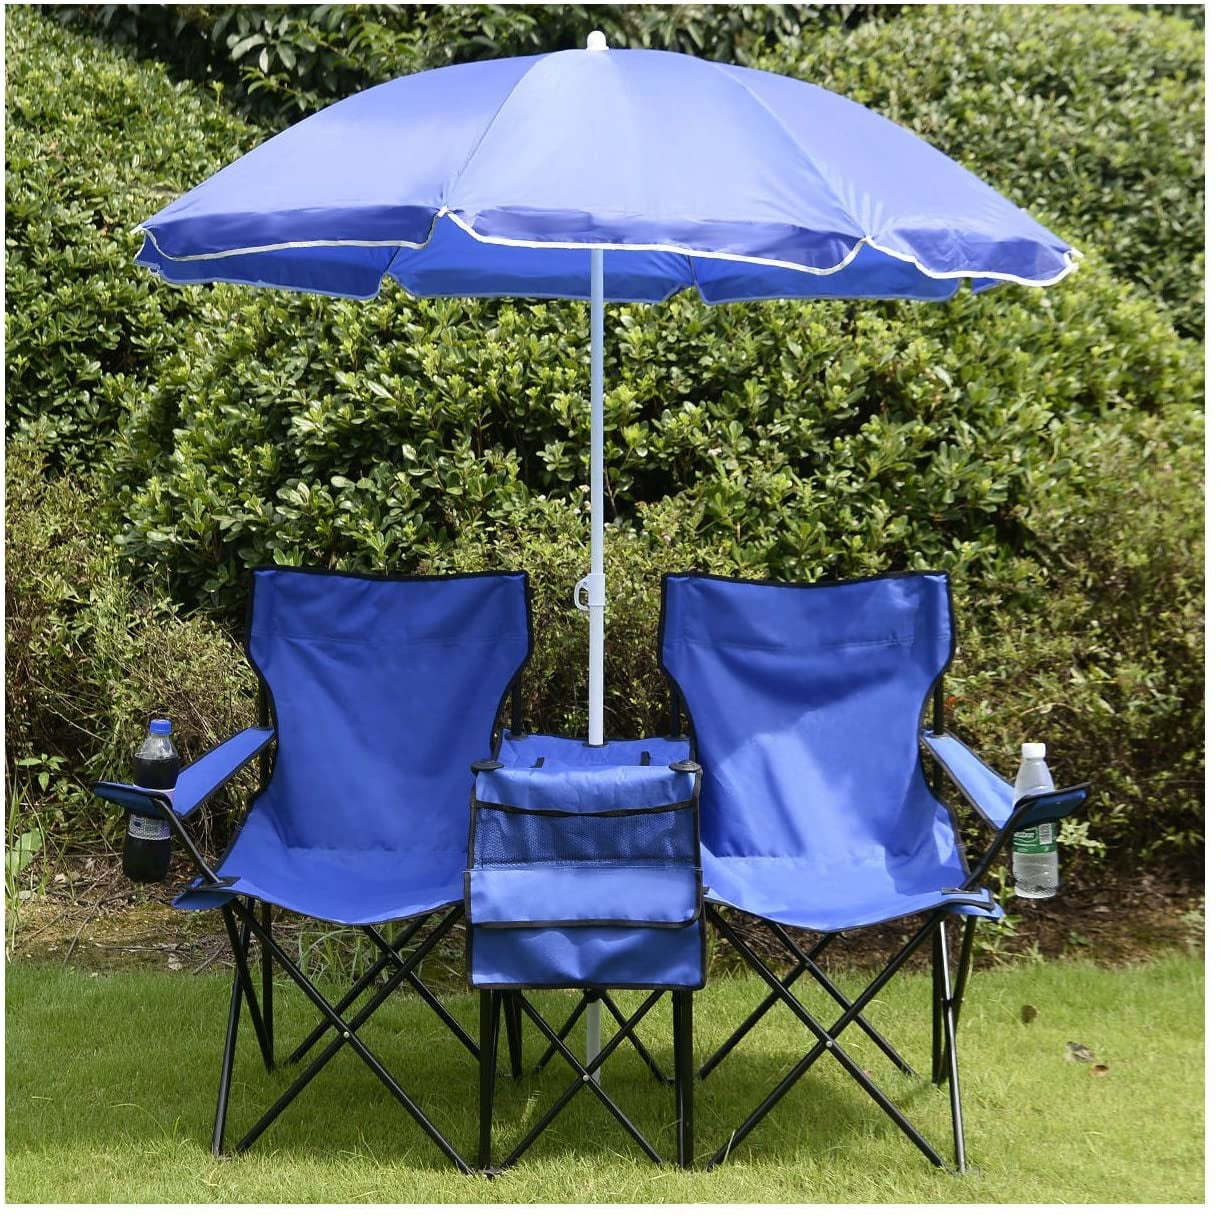 Folding Camping Chair With Canopy For Outdoor Garden Fishing Seat Beach Sunshade 